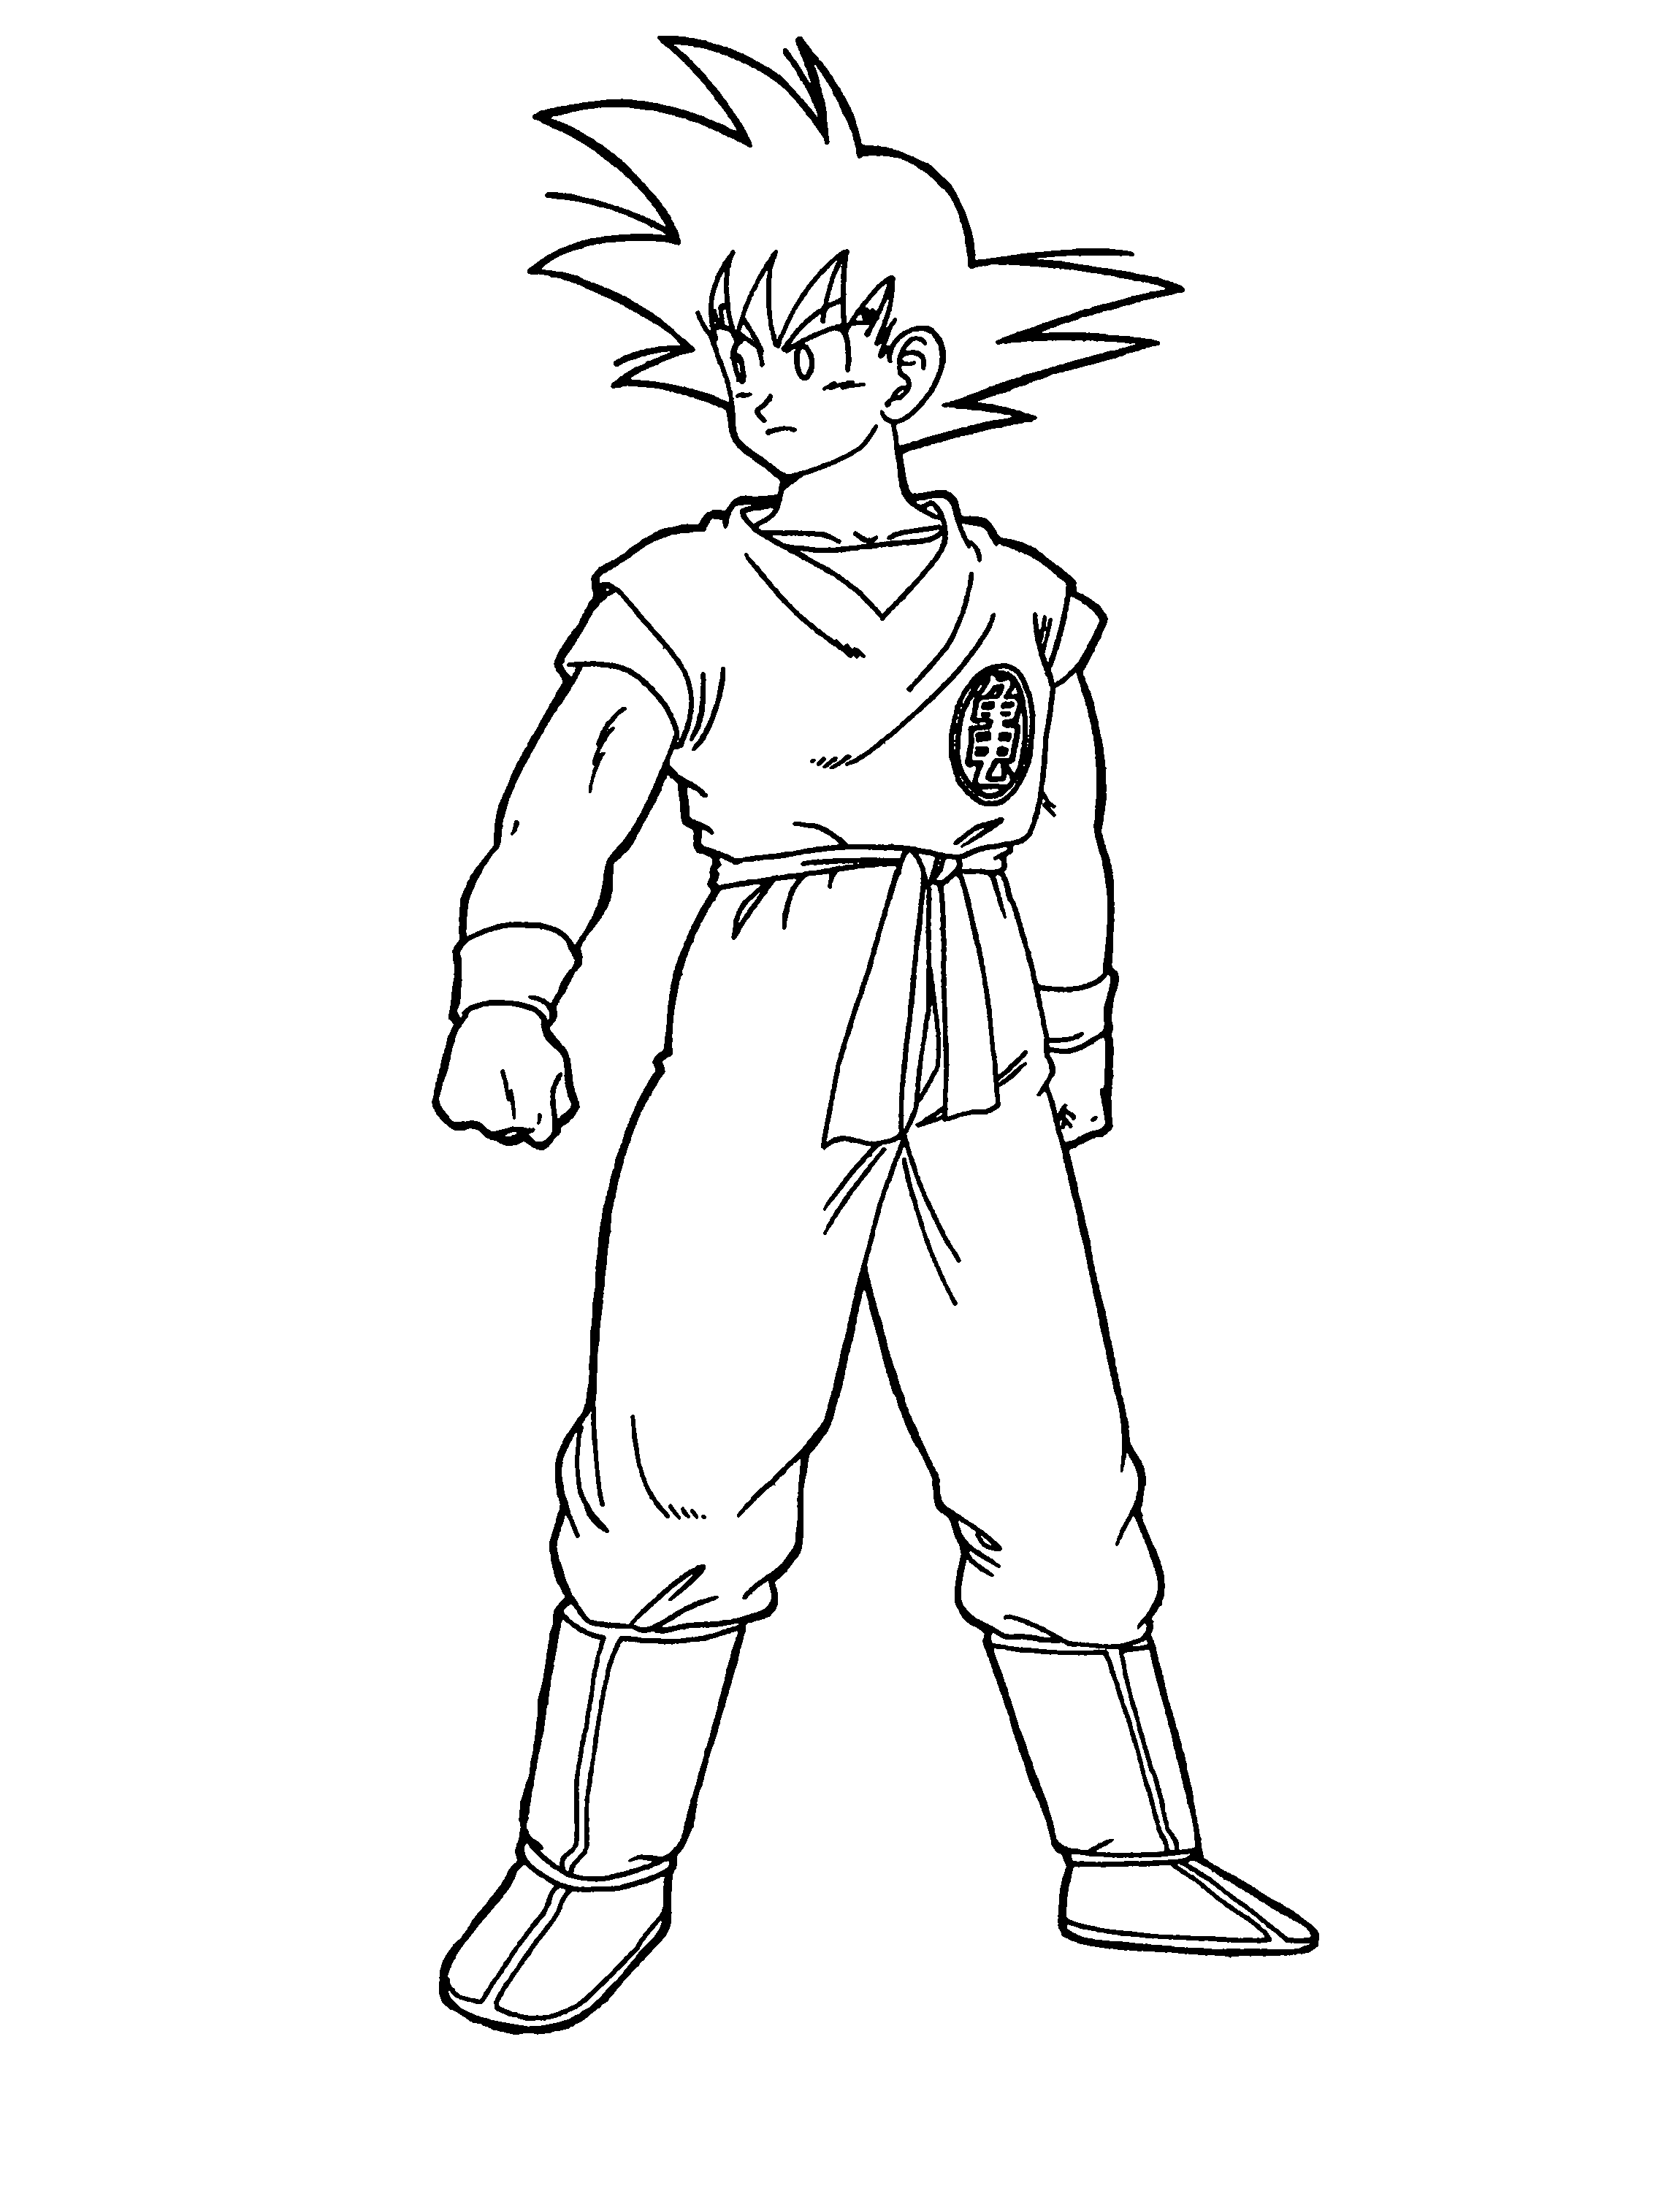 Dragon Ball Z Coloring Page - Coloring Pages for Kids and for Adults